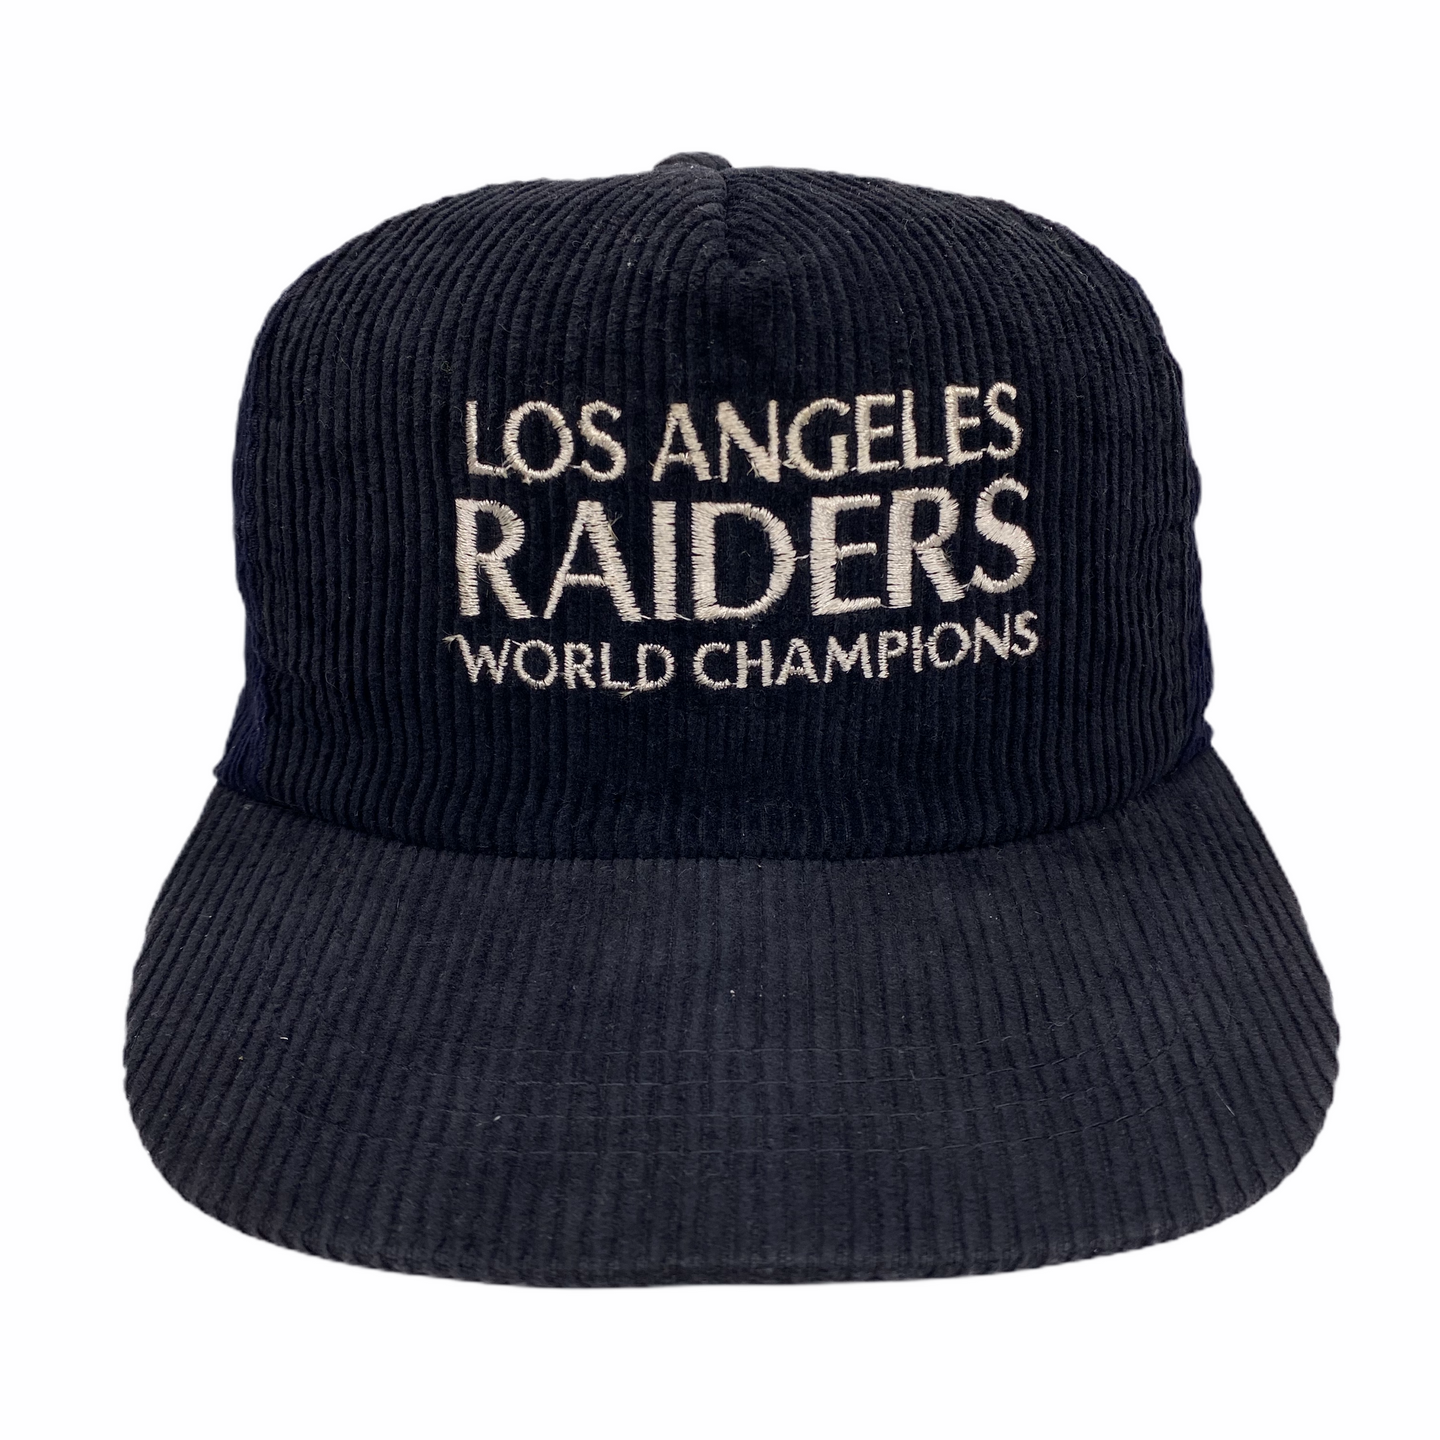 My first Las Vegas Raiders hat with Old English LV in corduroy! Thank